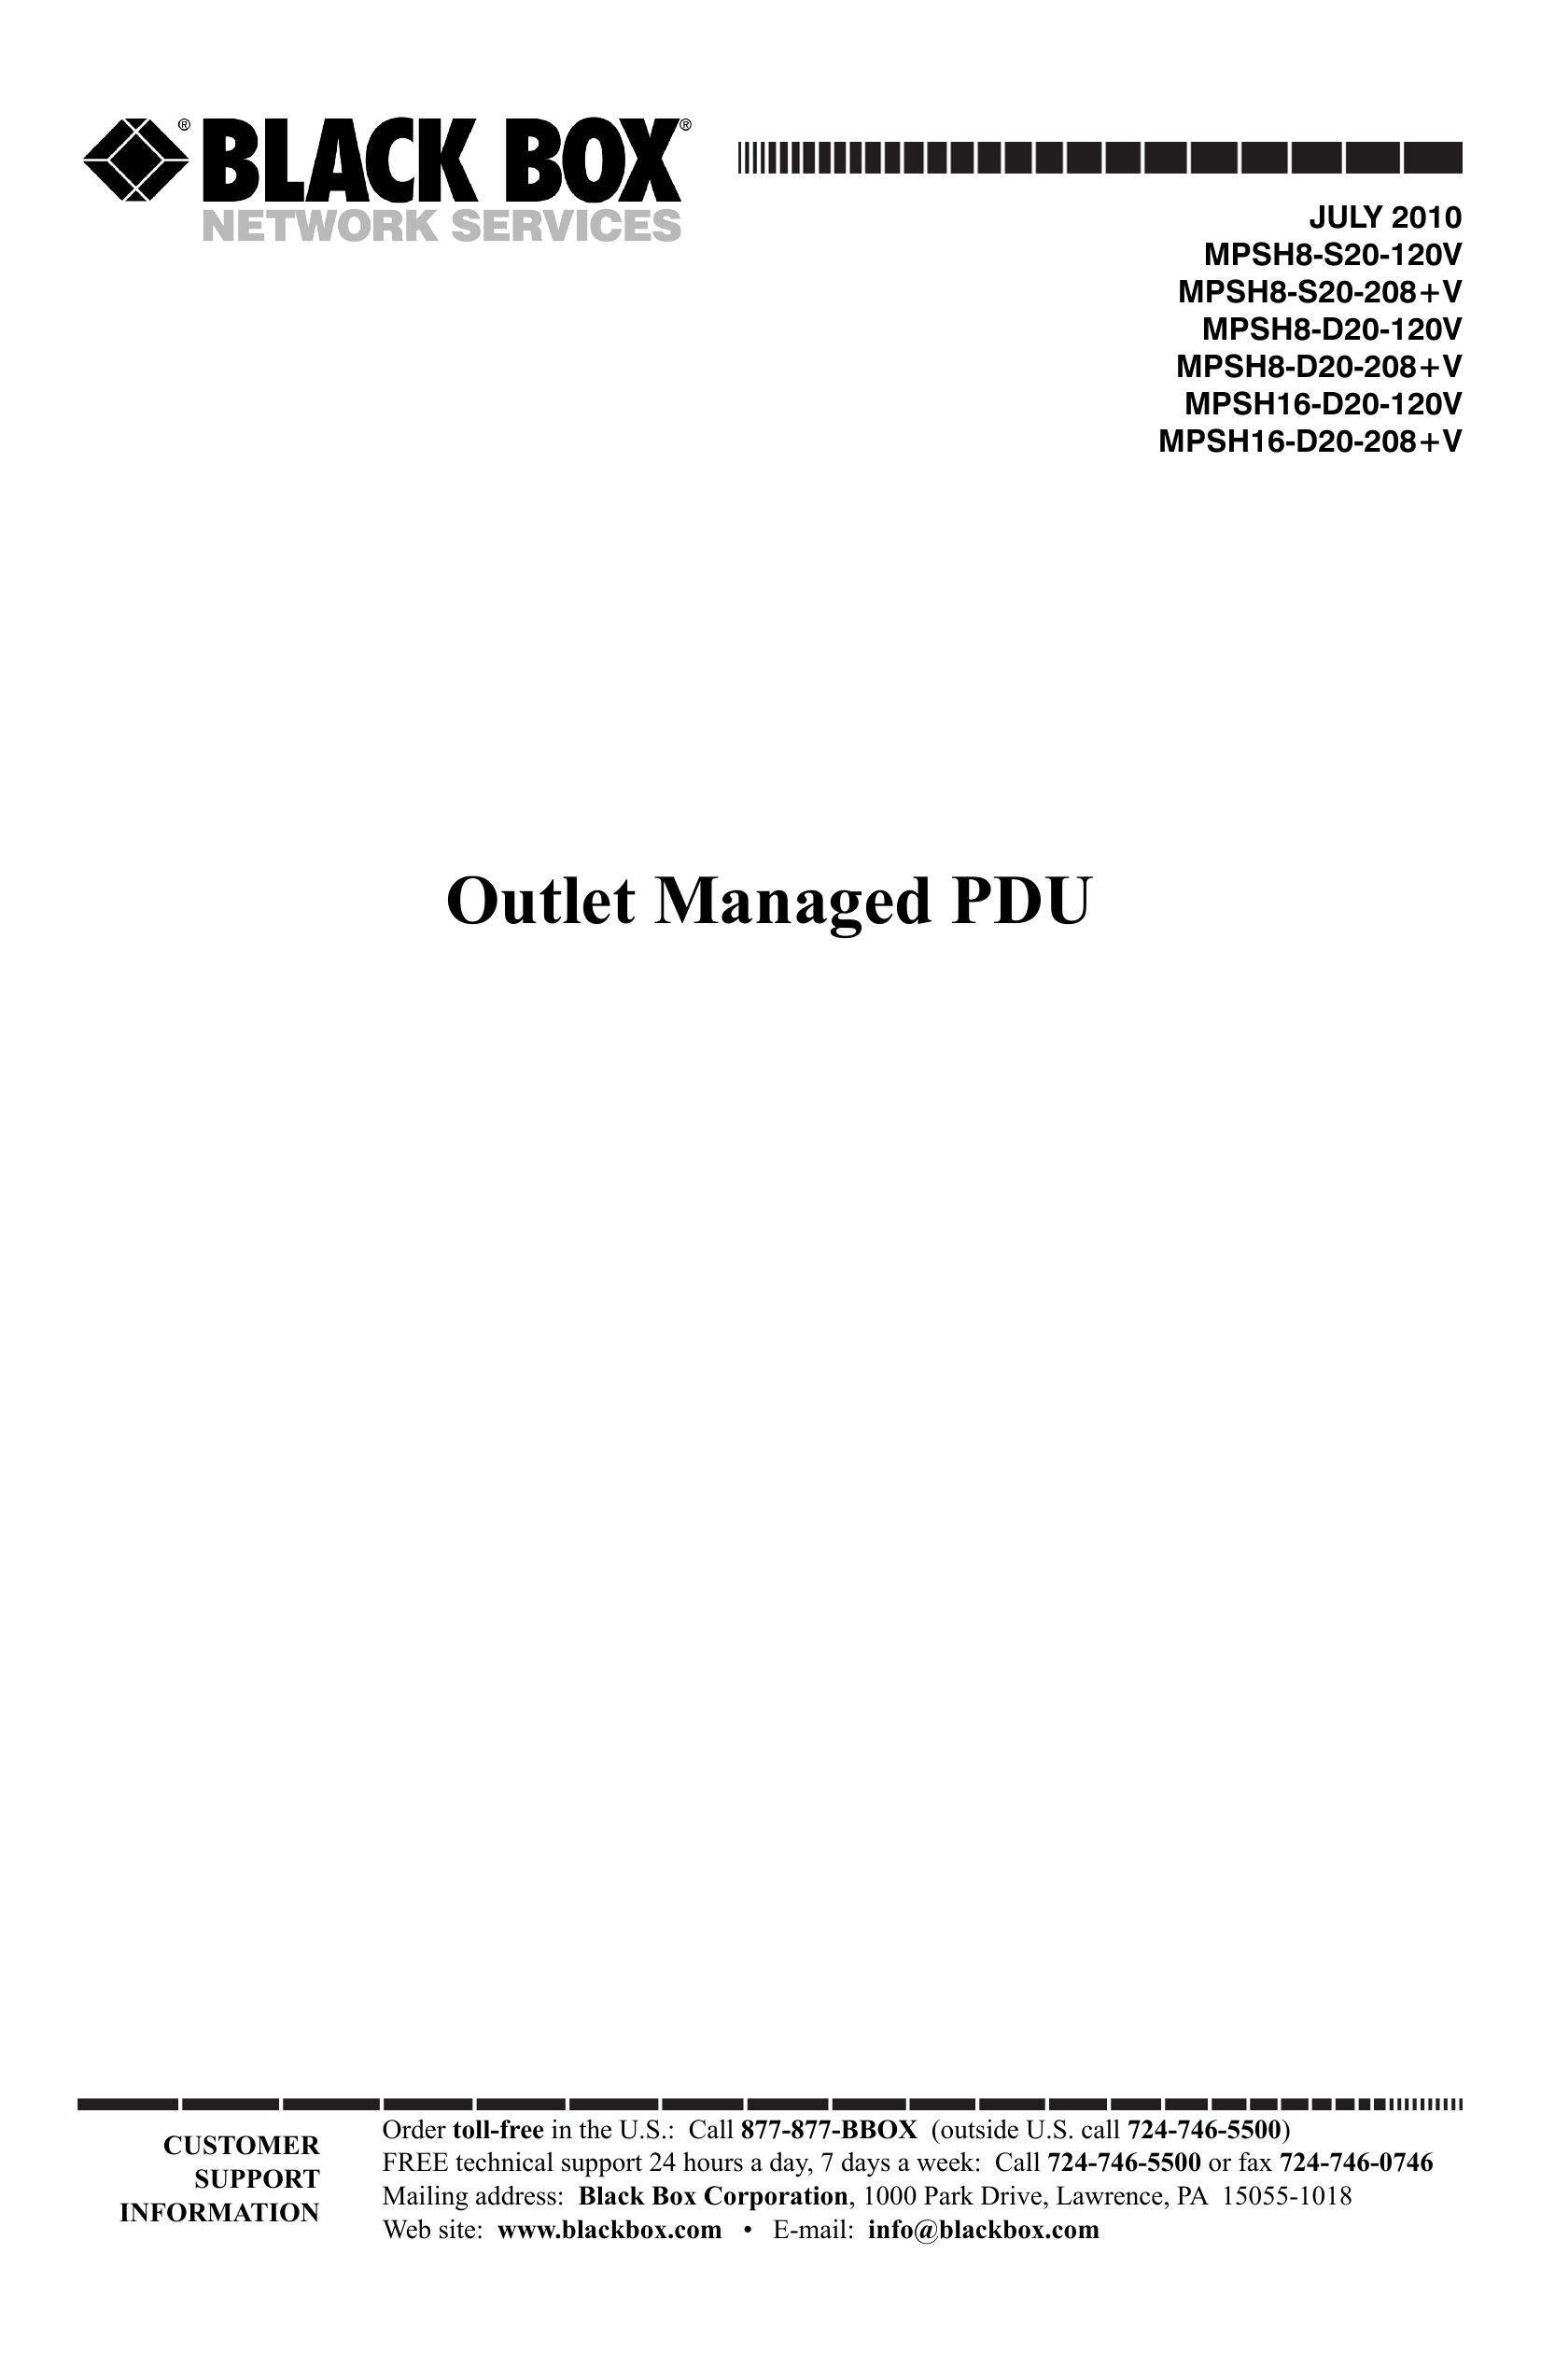 Black Box Outlet Managed PDU Multi-tool User Manual